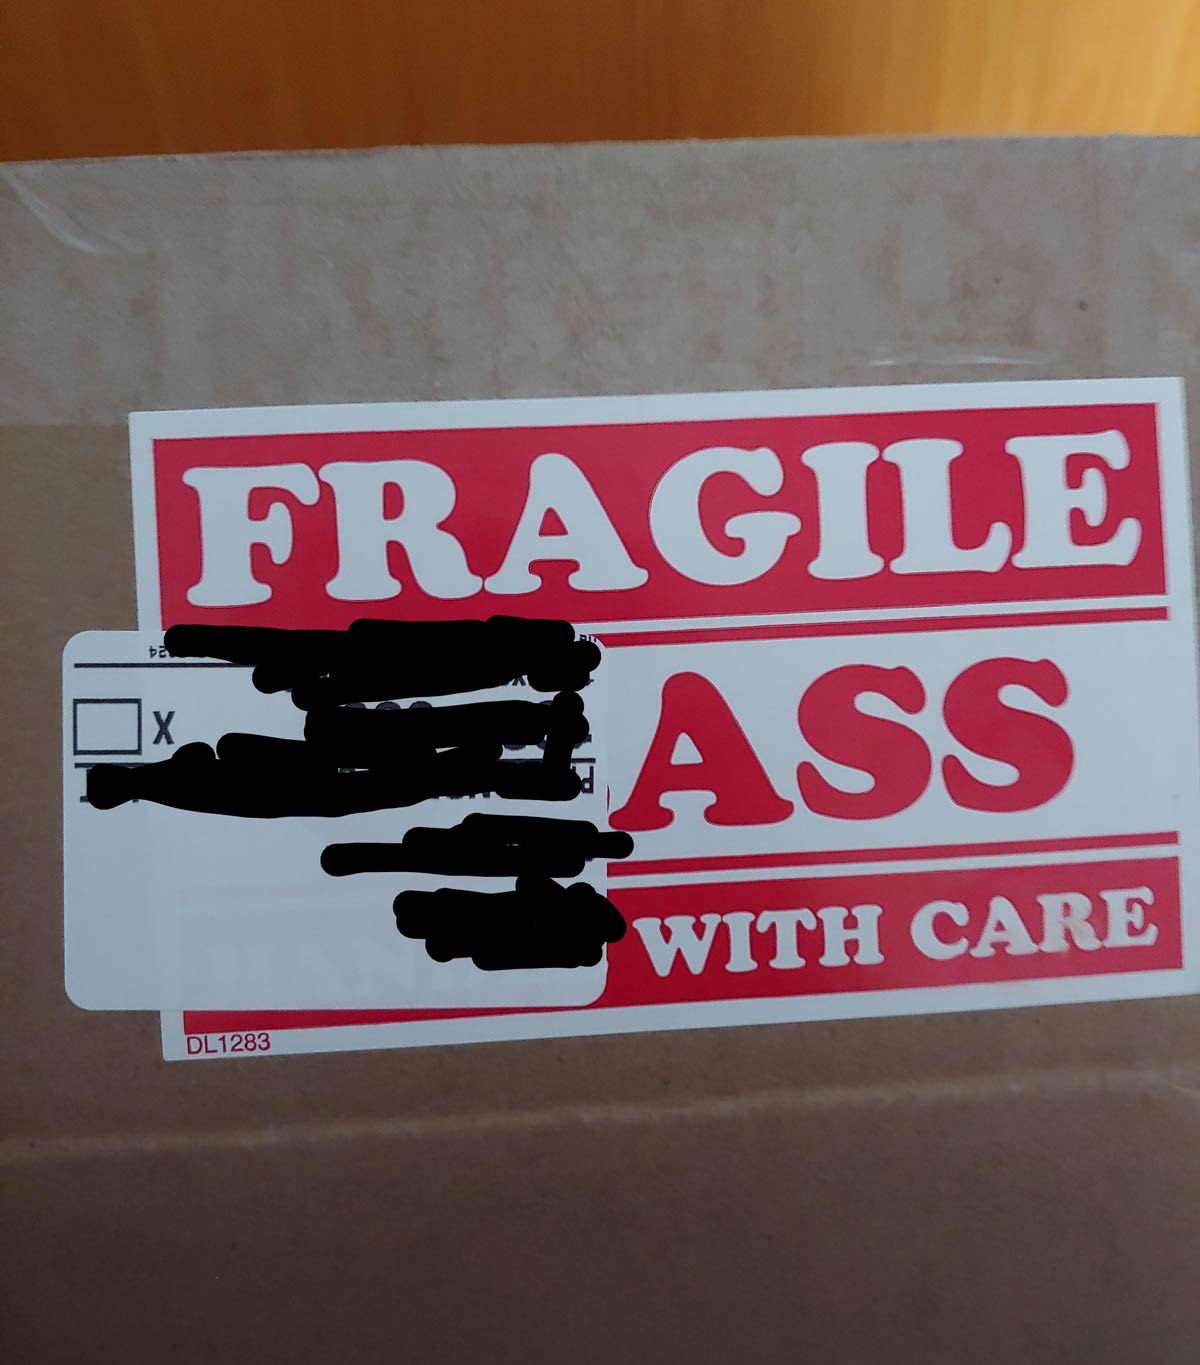 I think the package I received today is insulting me